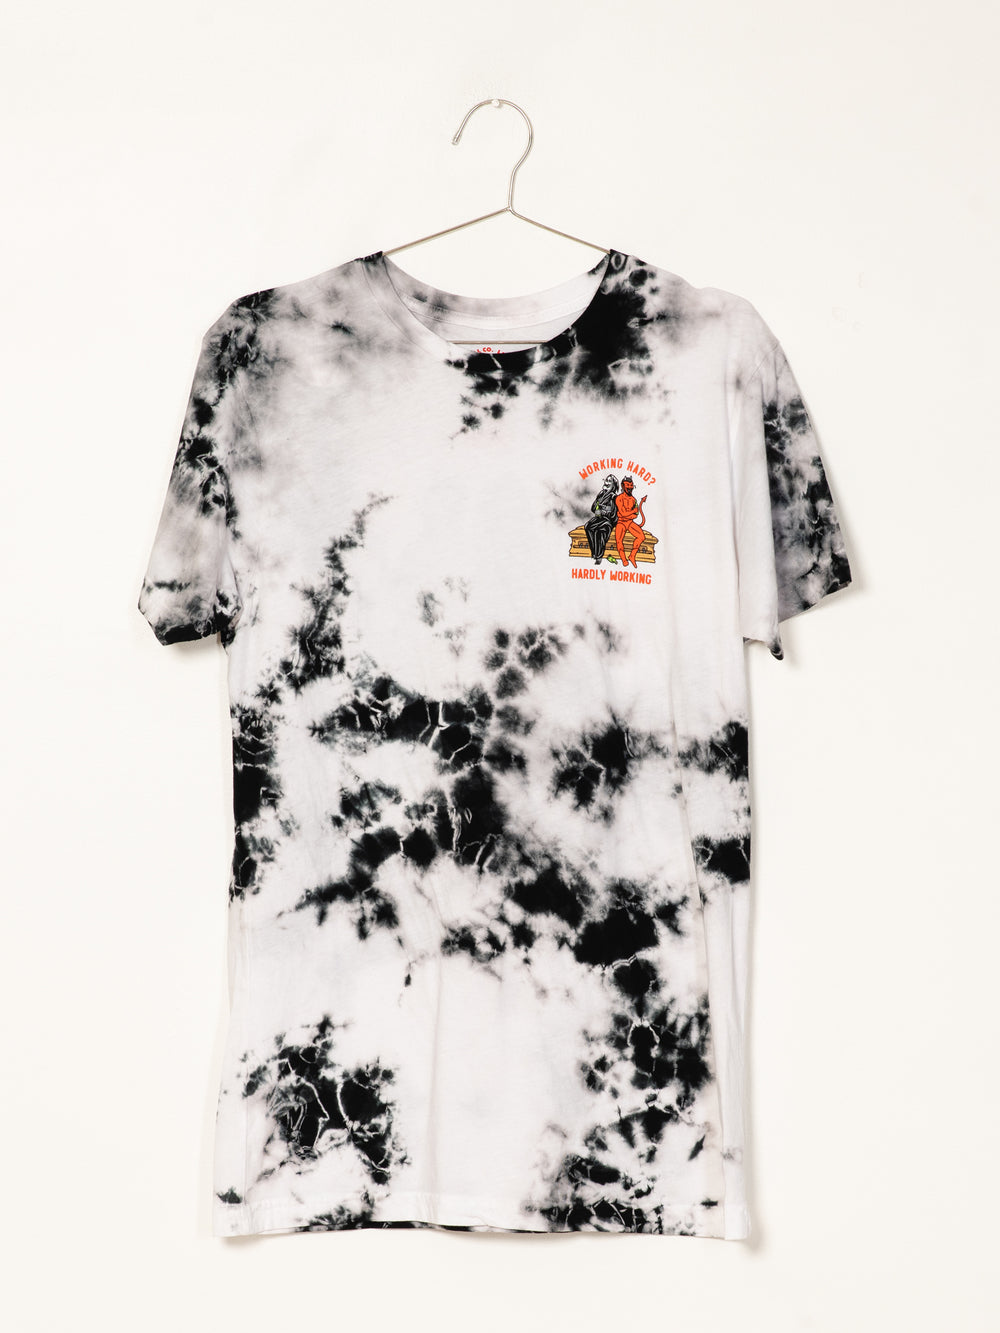 LAST CALL HARDLY WORKING T-SHIRT - TIE DYE - CLEARANCE